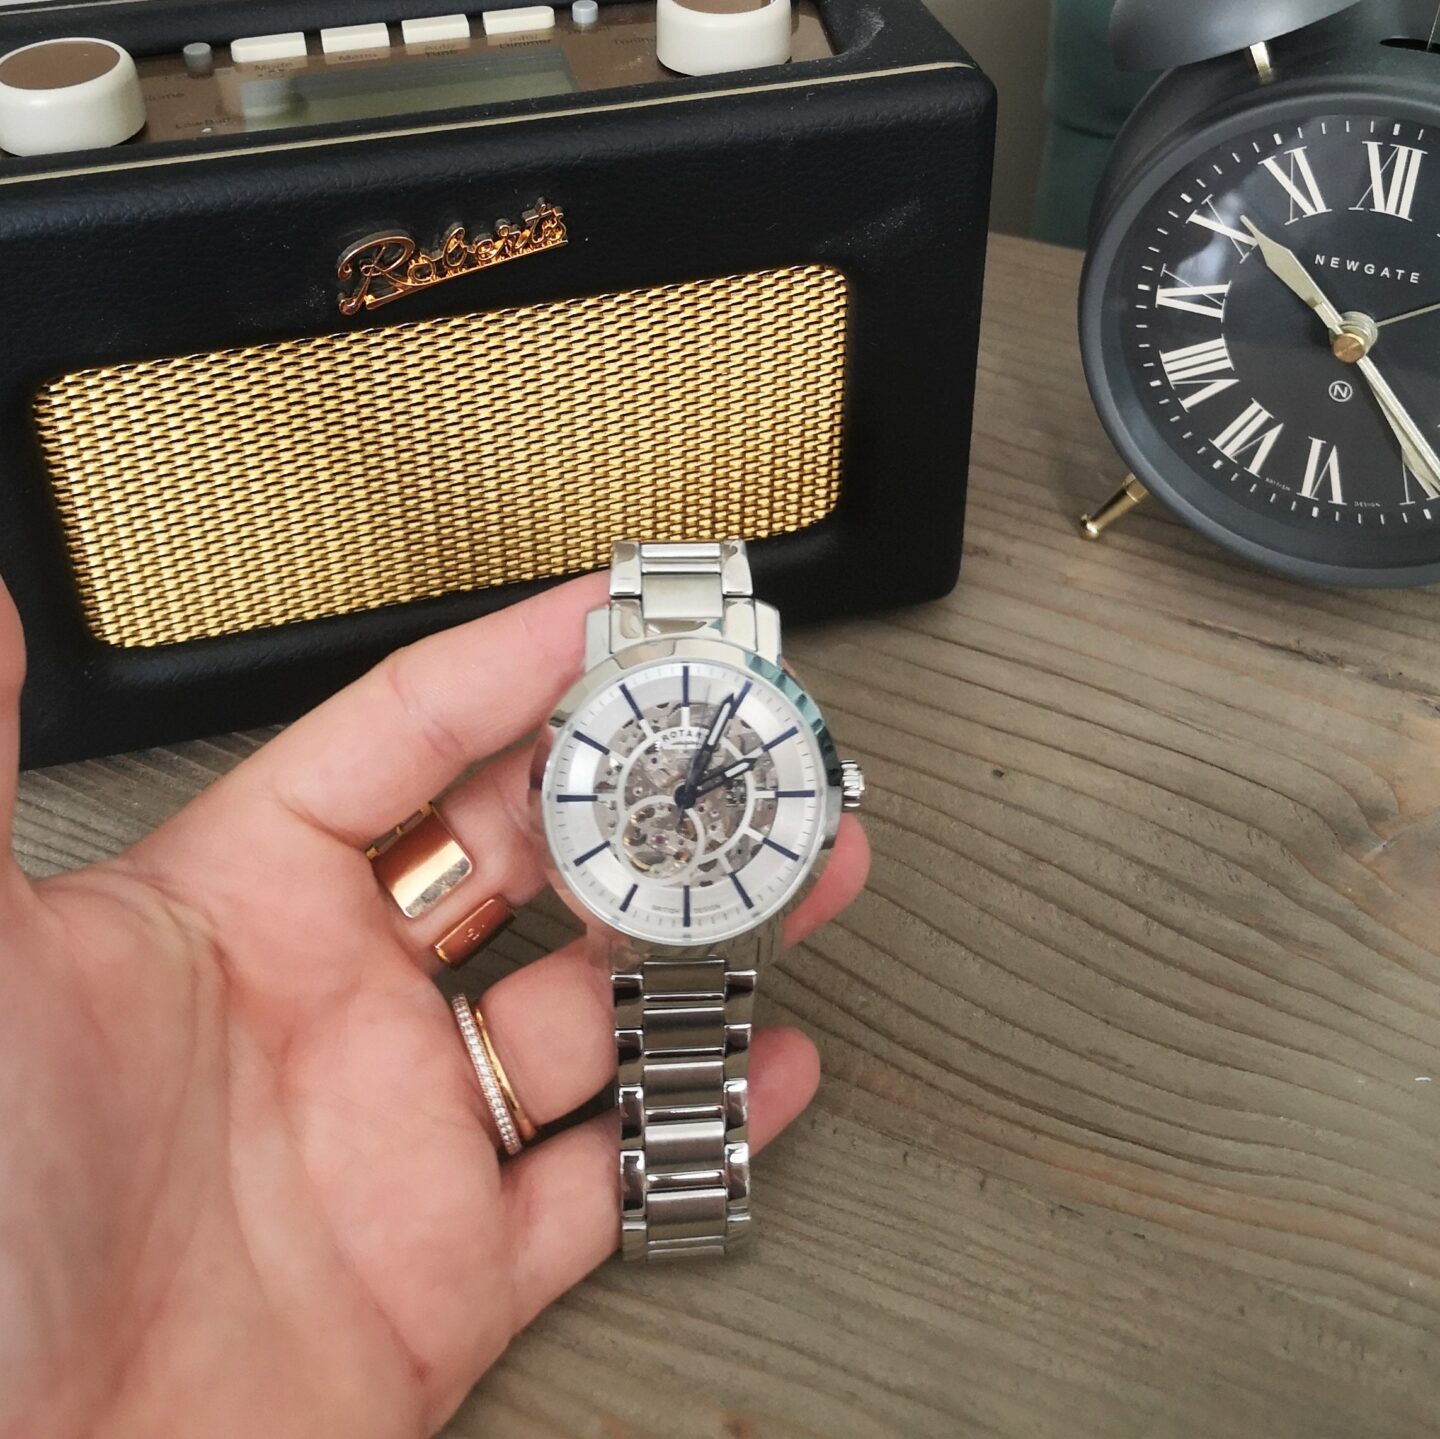  Rotary Greenwich Watch, Rotary Watches, Greenwich Collection, Stainless Steel Watch, Gents Watch, Luxury Watches, Father's Day Giveaway, Win, Competition, the Frenchie Mummy